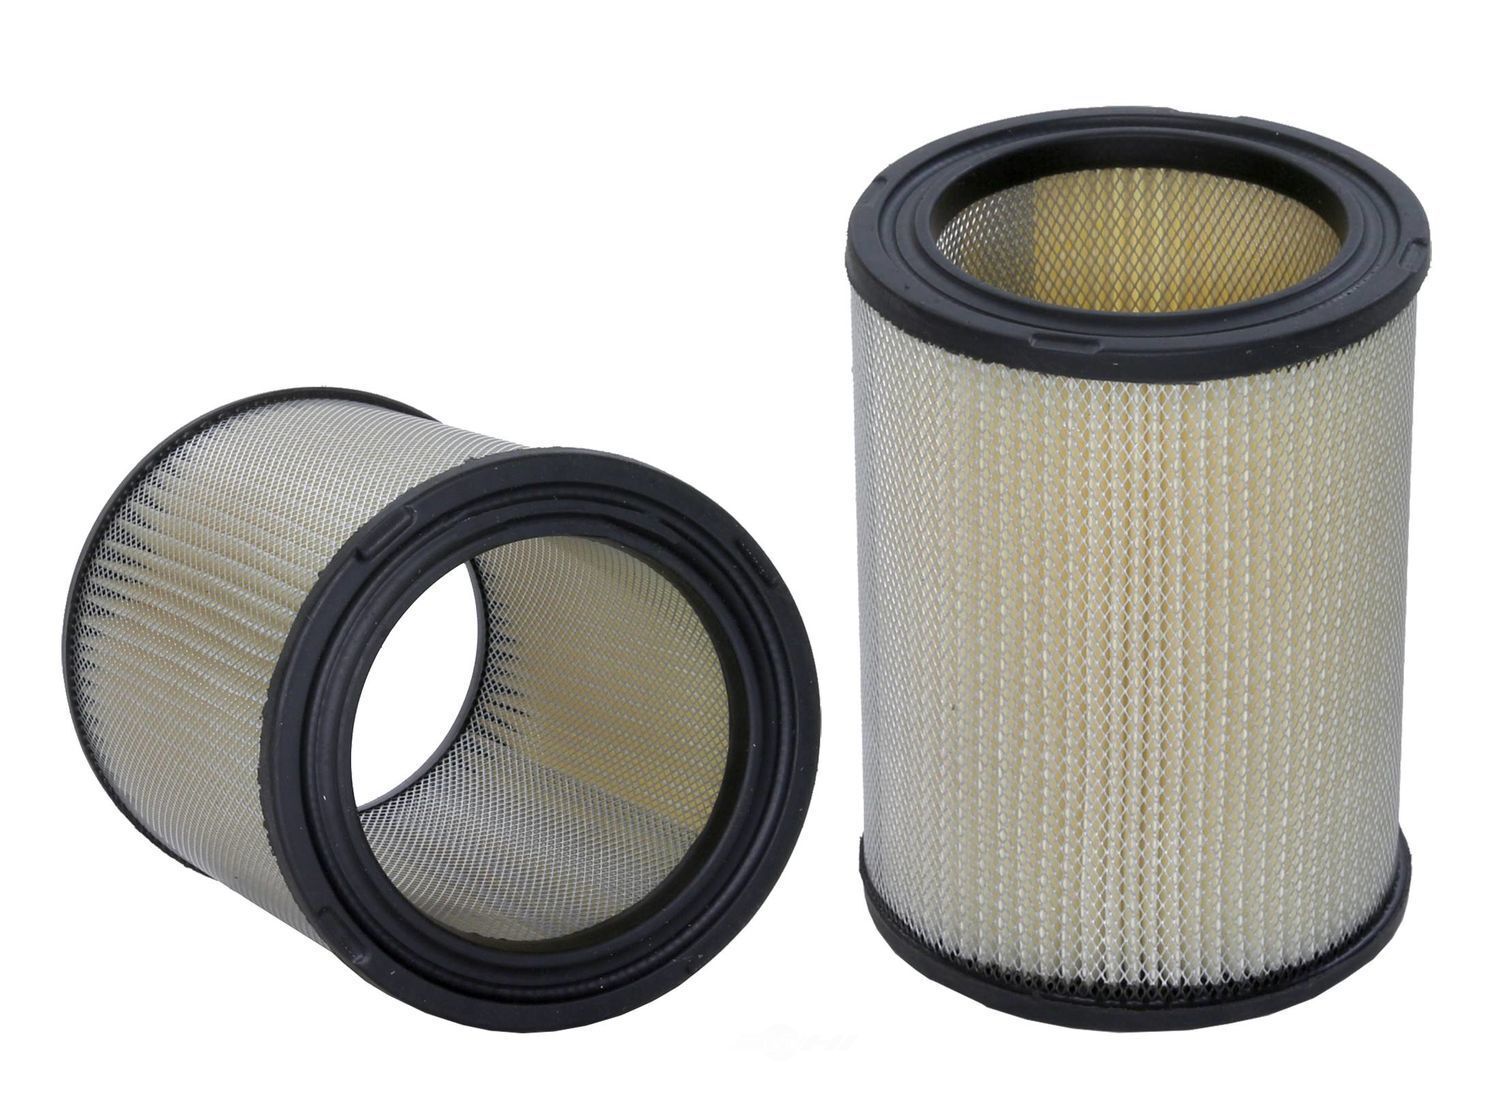 ✅WIX NEW ONE (1) AIR FILTER FITS BUICK SKYLARK 88-89 #46173